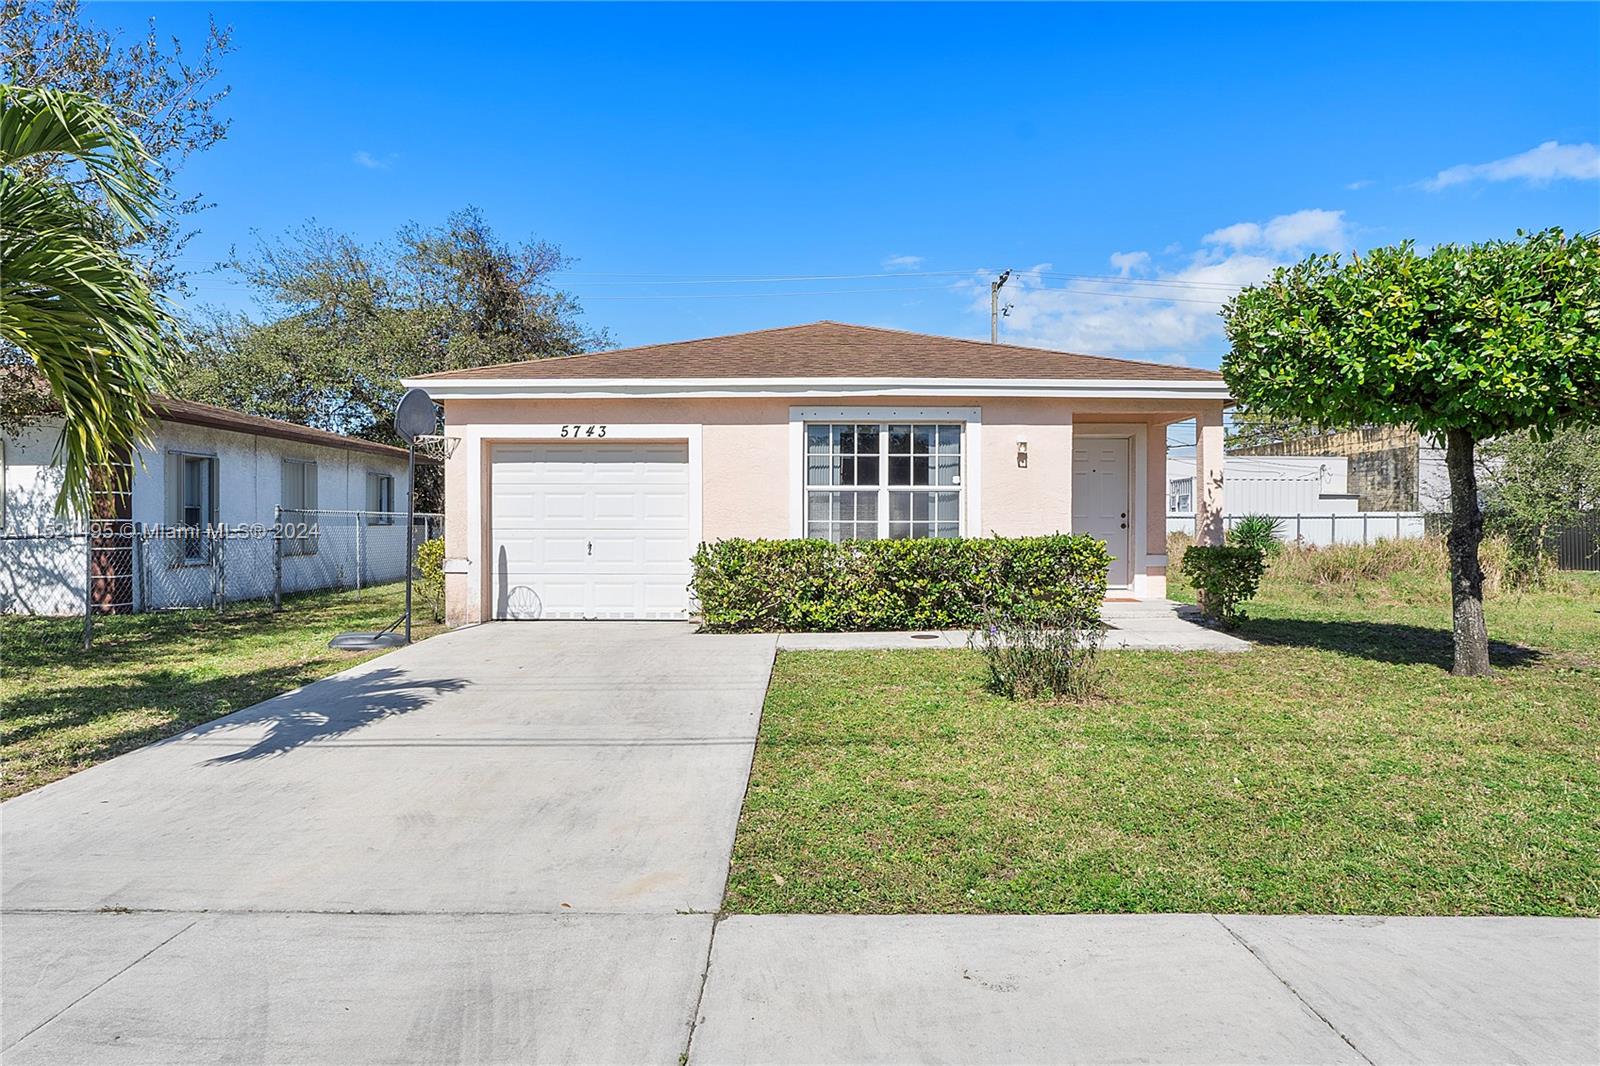 5743 Wiley St St, Hollywood, Broward County, Florida - 3 Bedrooms  
2 Bathrooms - 